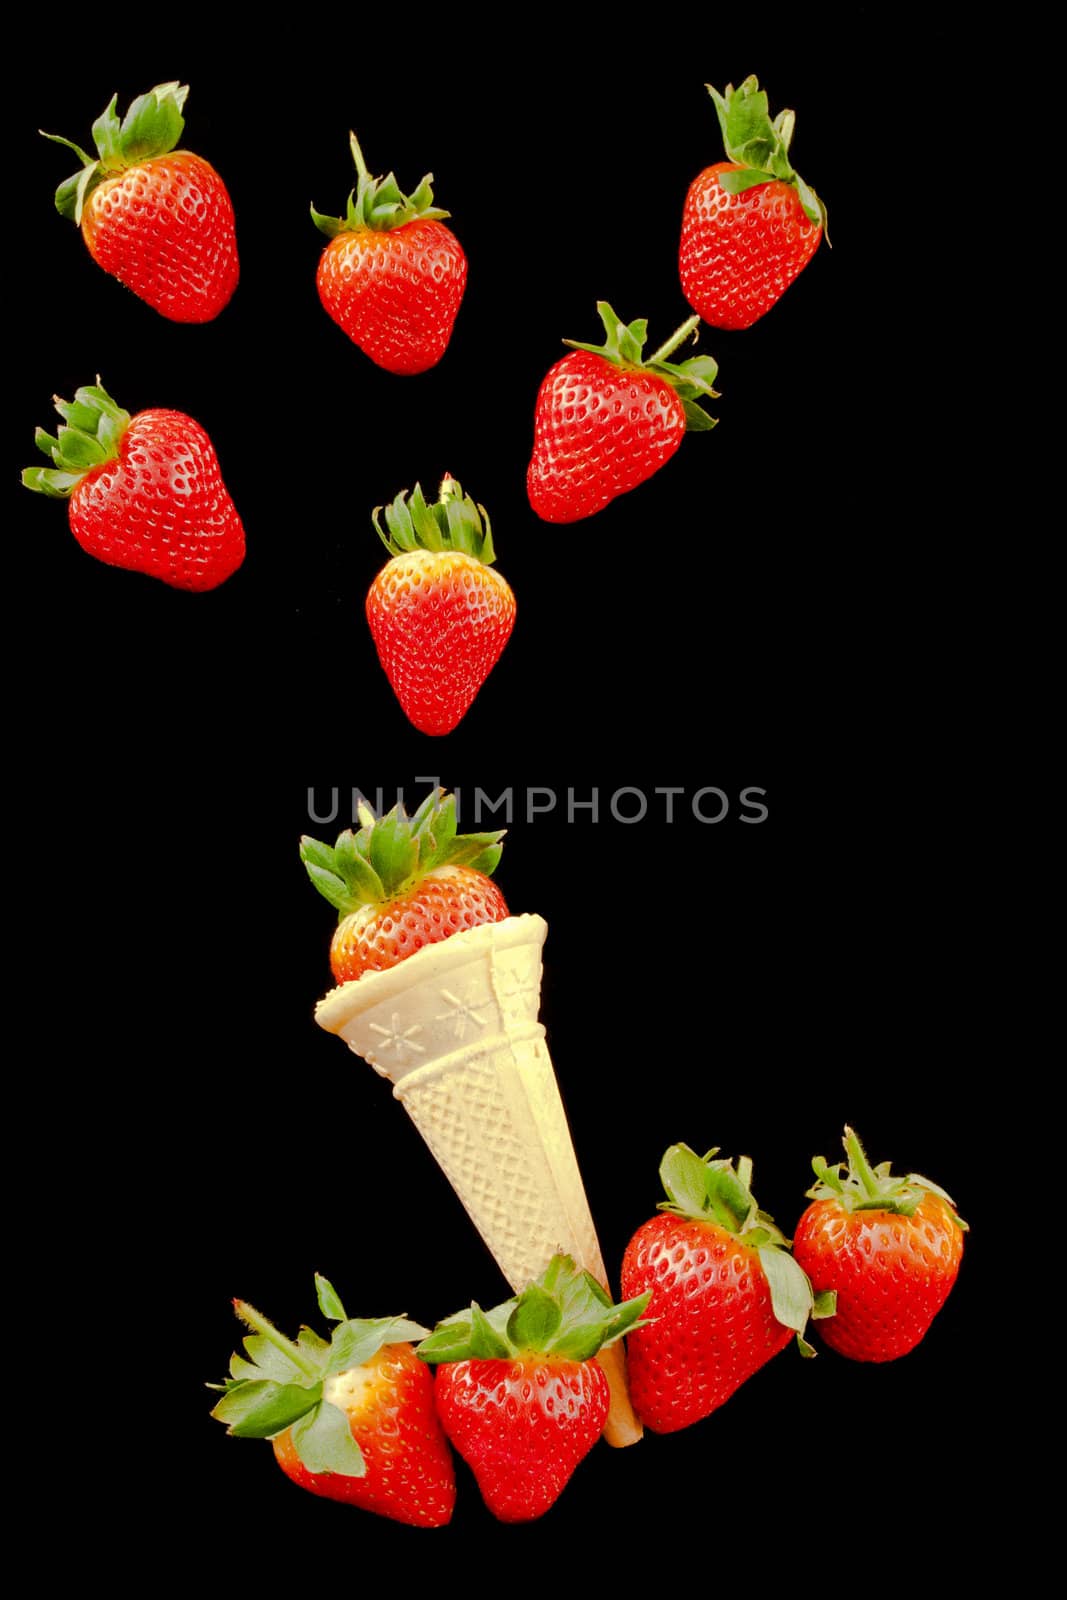 strawberries and a wafer cone